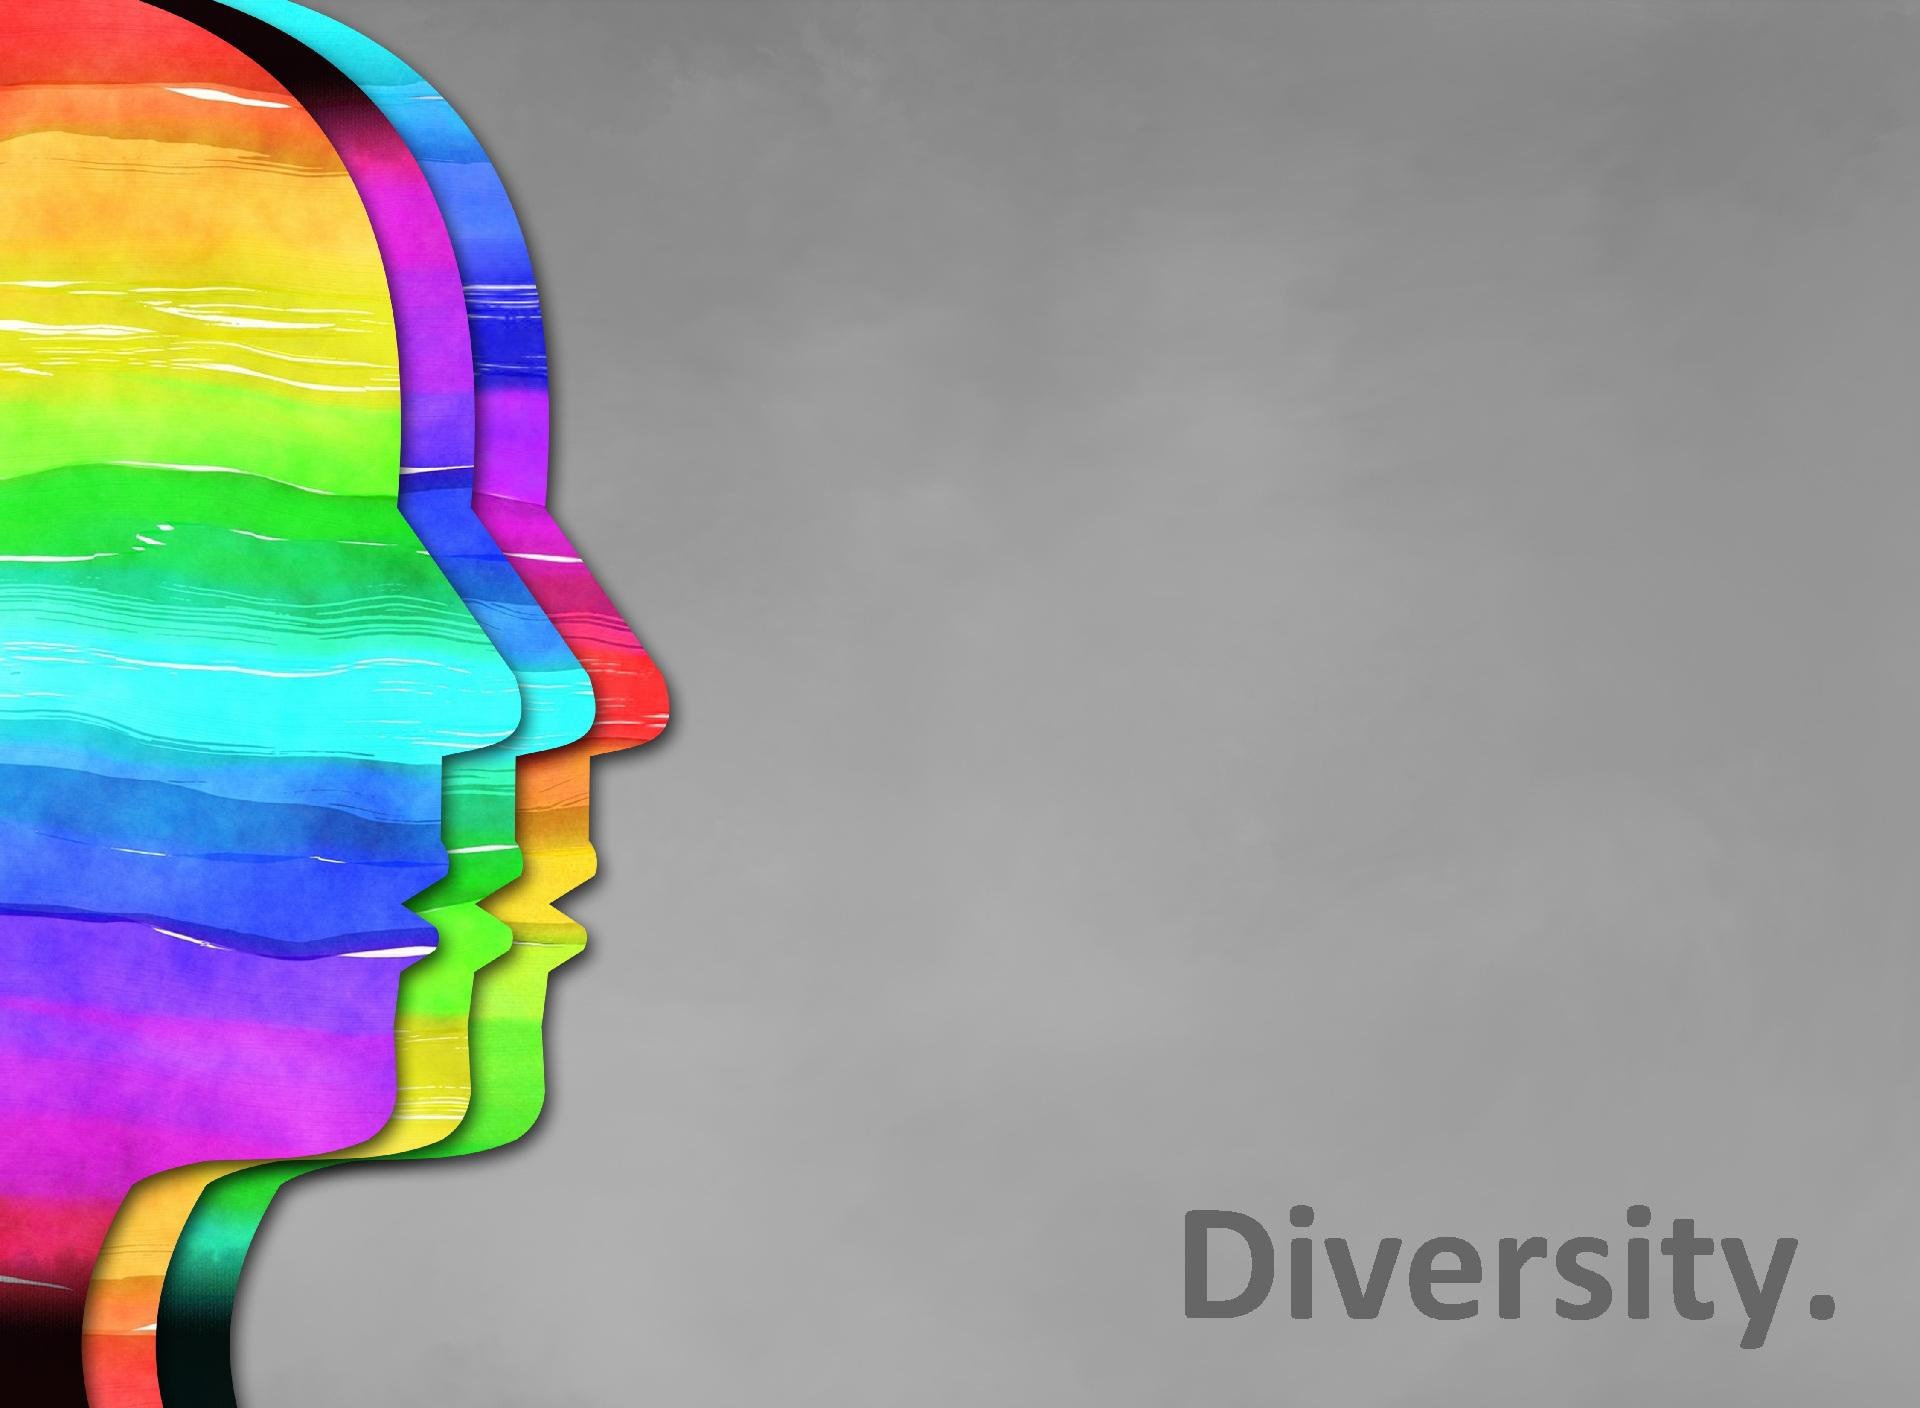 Diversity Management – Knowledge for tomorrow